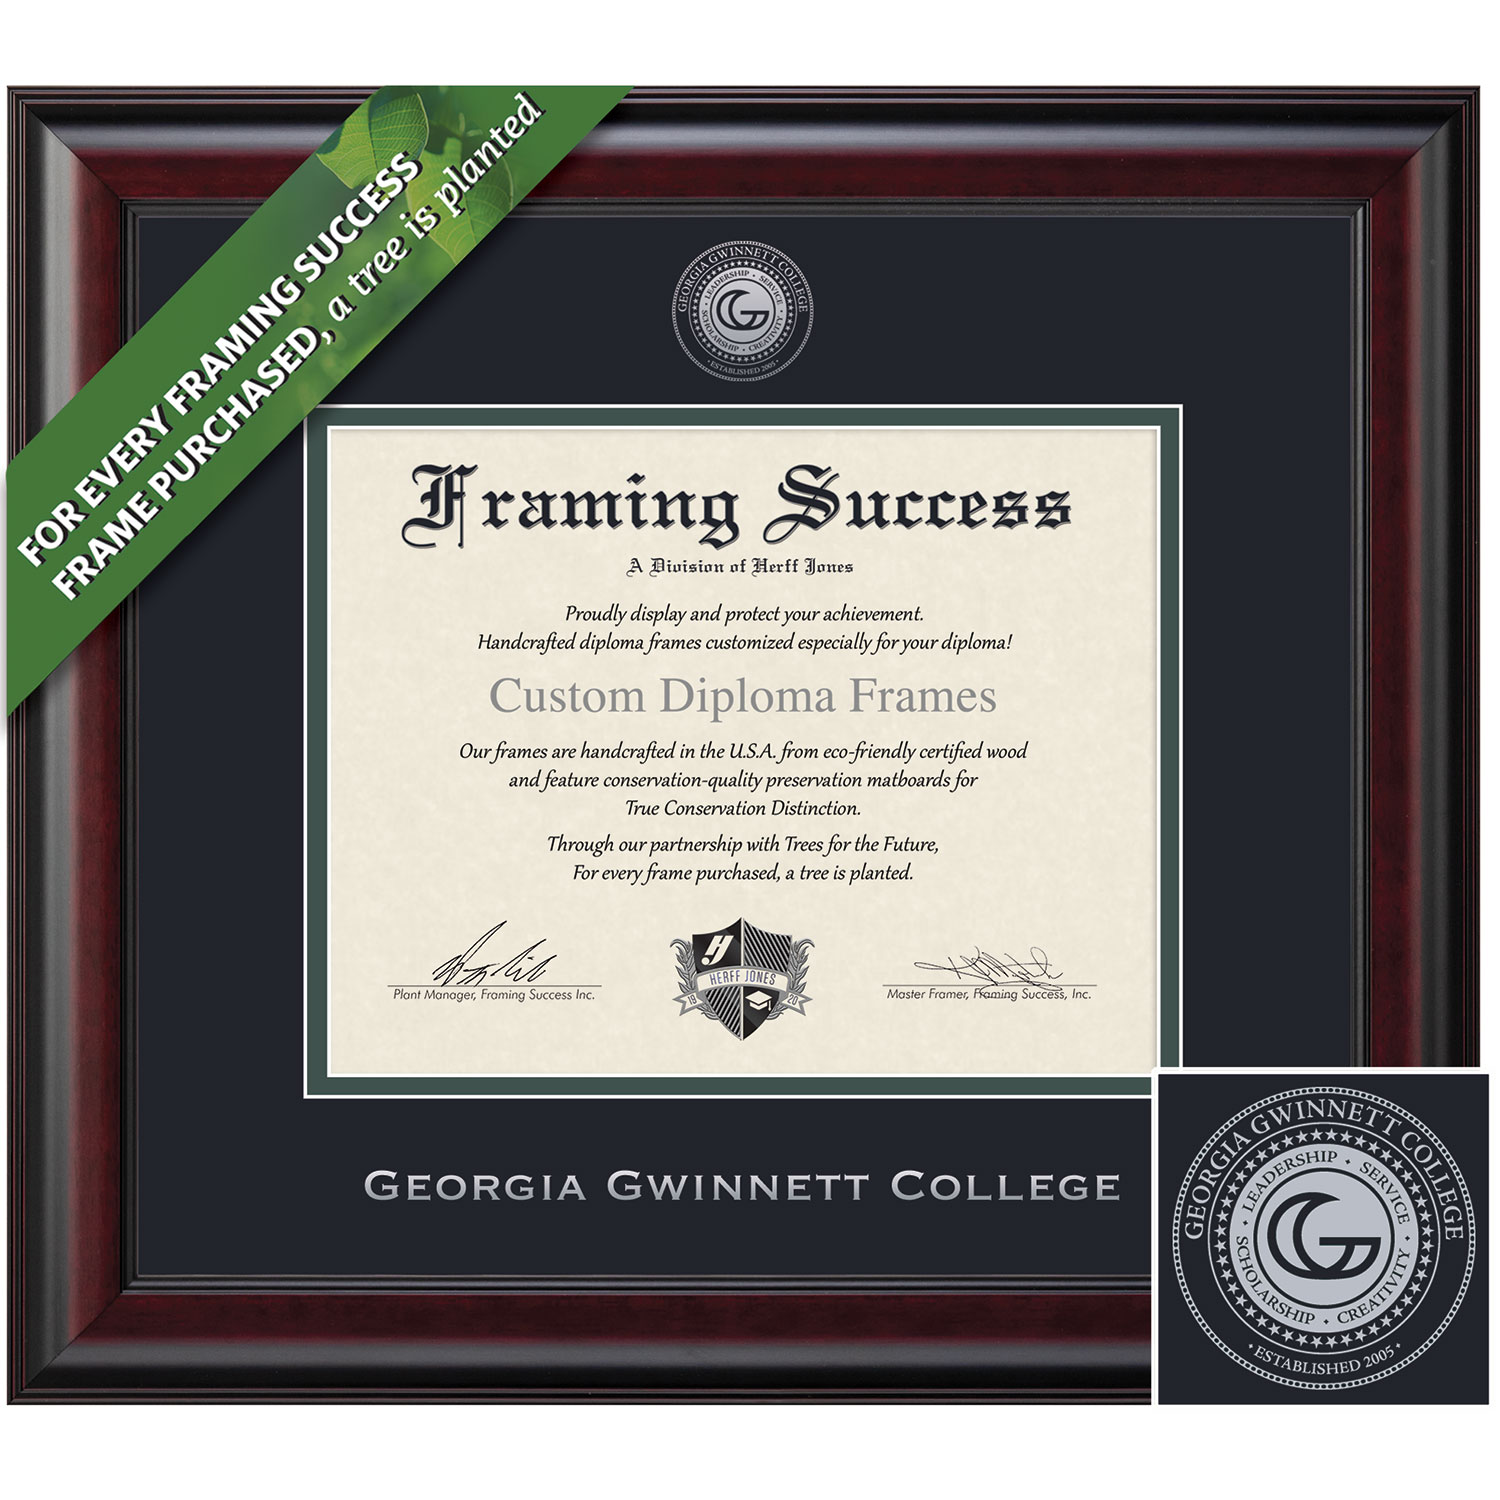 Framing Success 11 x 14 Classic Silver Embossed School Seal Bachelors Diploma Frame